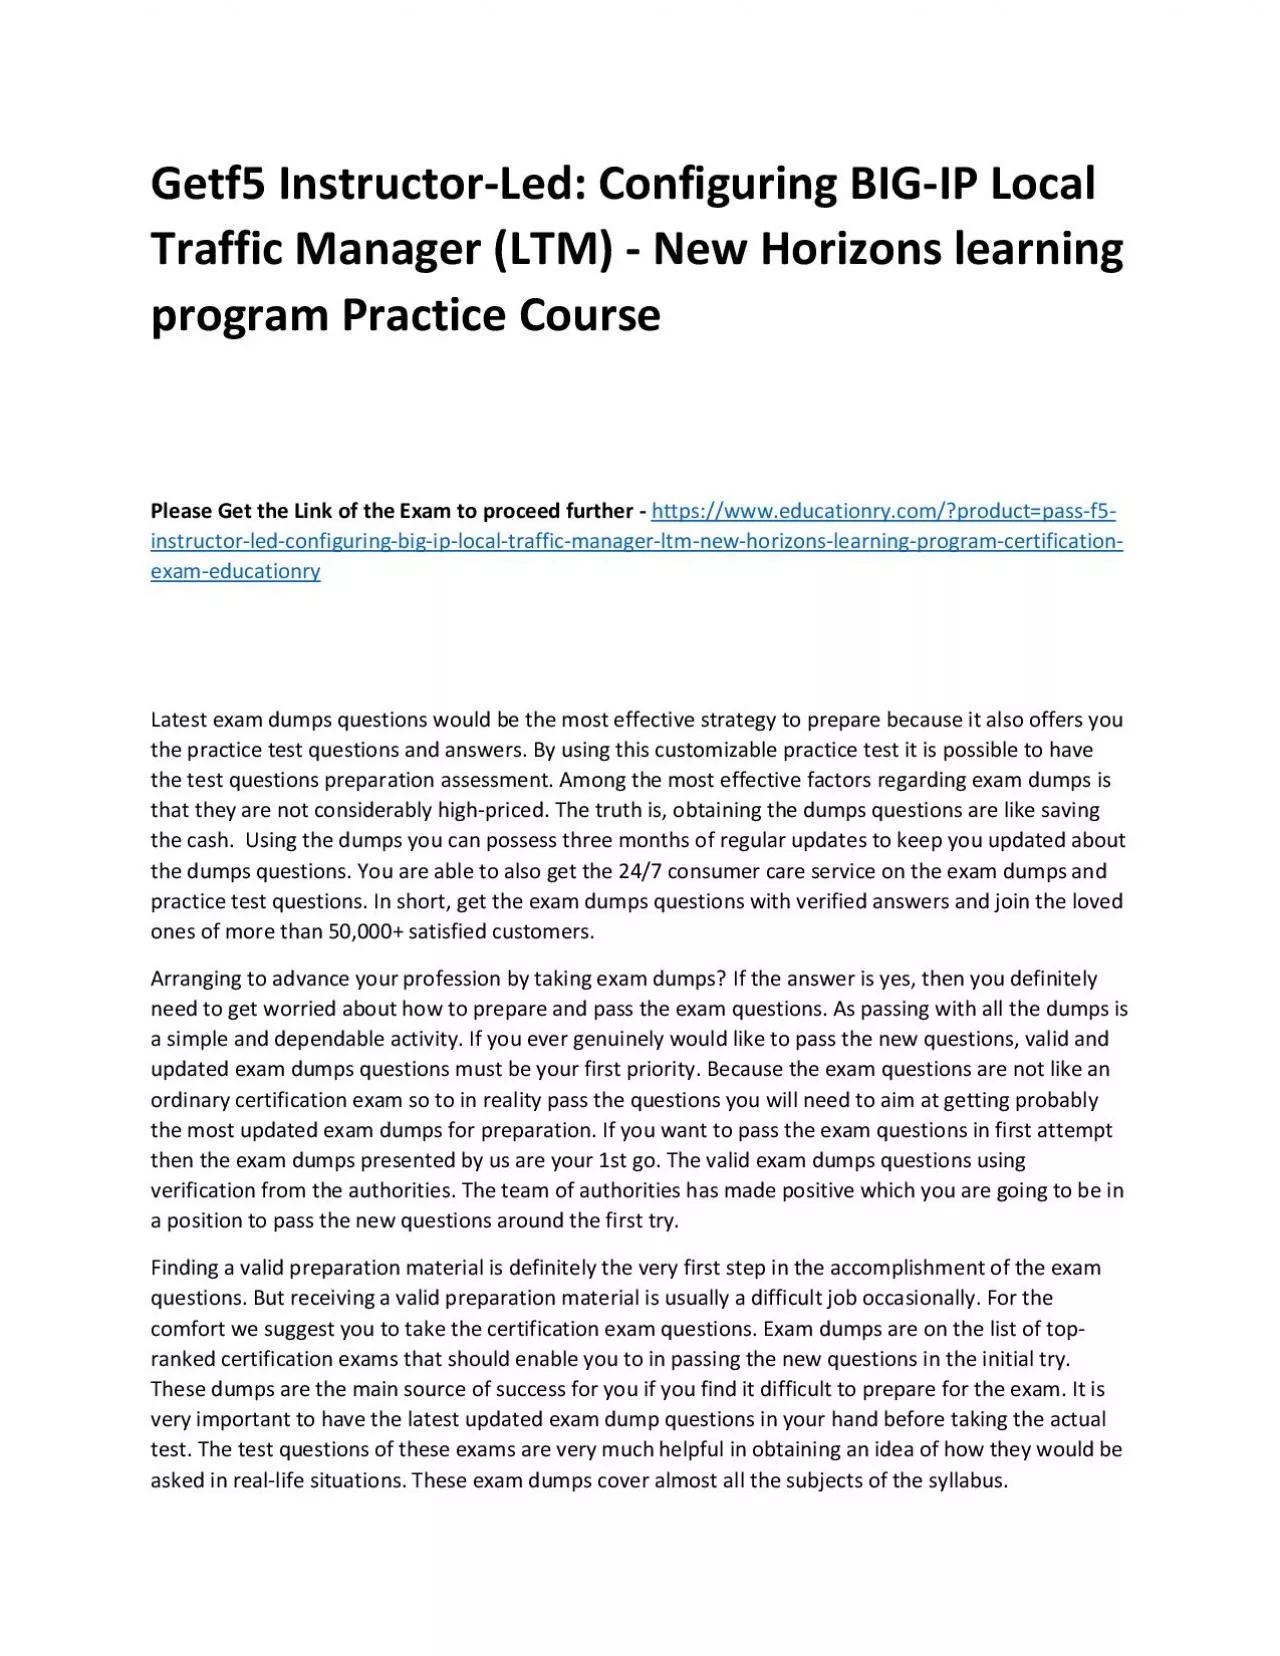 f5 Instructor-Led: Configuring BIG-IP Local Traffic Manager (LTM) - New Horizons learning